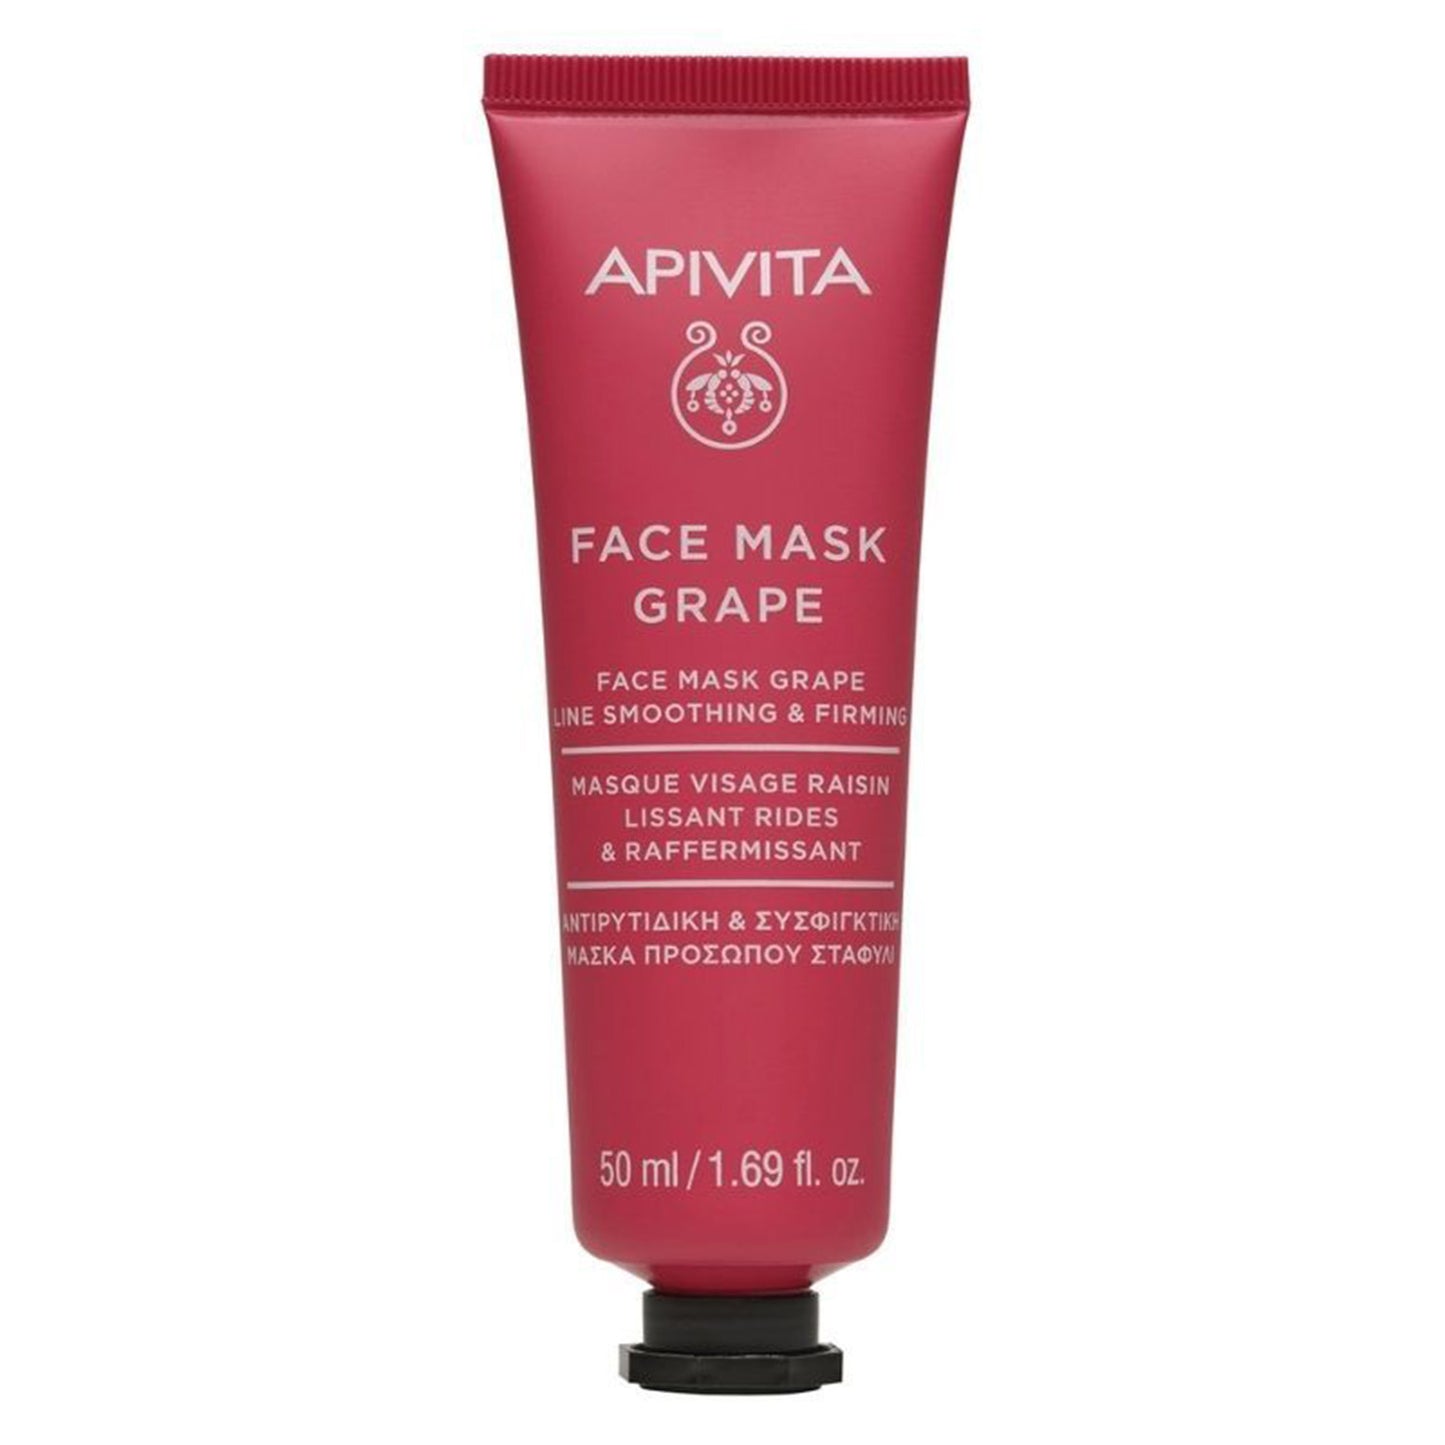 Apivita Face Mask Grape is formulated with the renowned longevity-promoting grape extract native to the Mediterranean, is enriched with nourishing elements and boasts an immediate antioxidant and anti-aging effect.